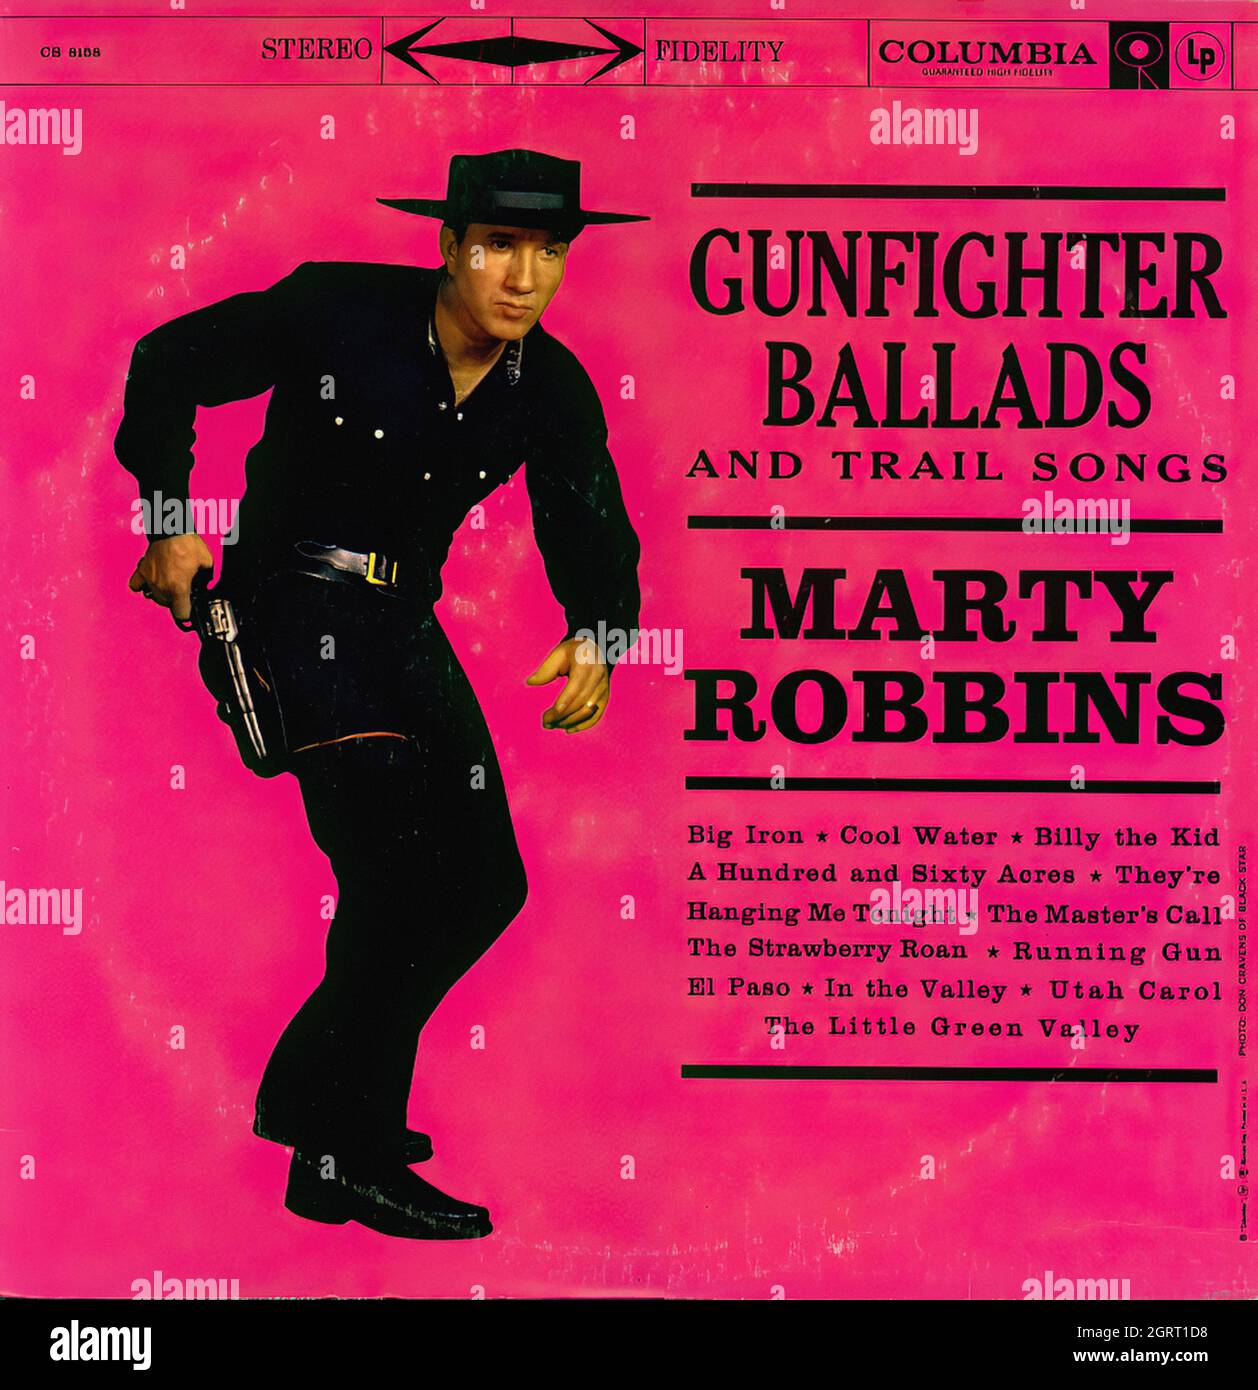 Marty Robbins - Gunfighter Ballads And Trail Songs - Vintage Country Music Album Stock Photo